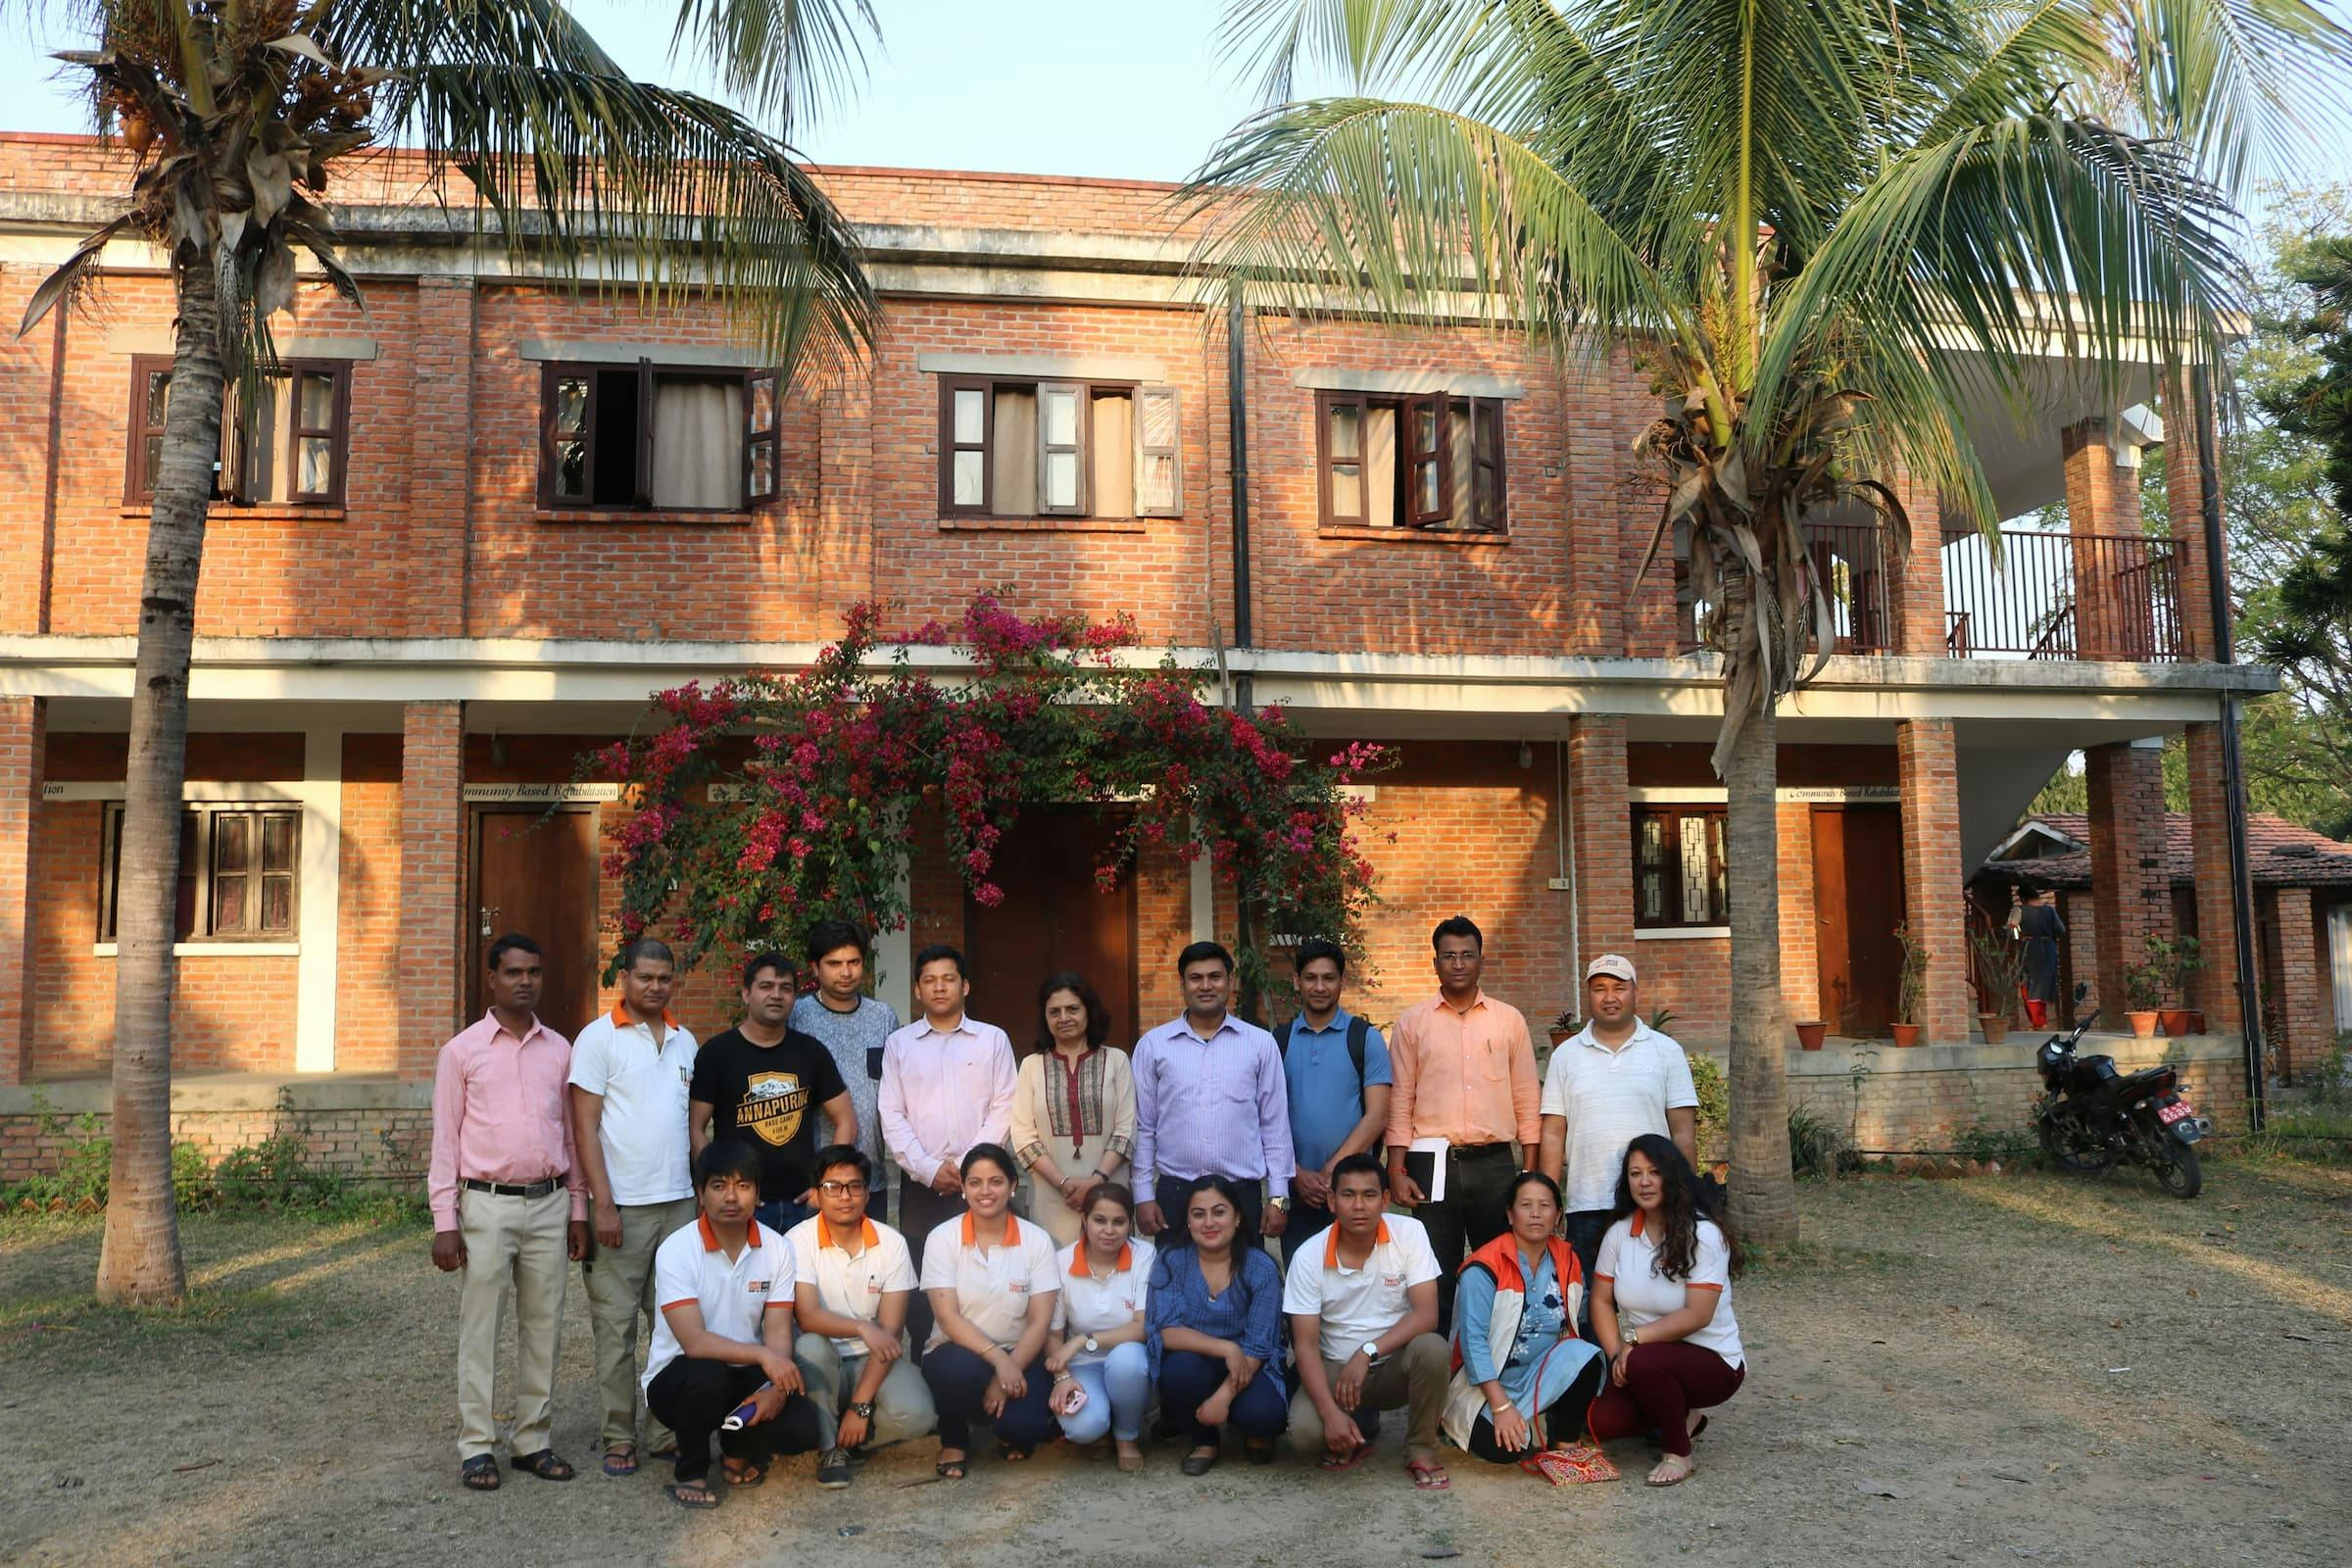 A group photo of the Nepal team. Some of them are wearing a white polo shirt with orange collar and FAIRMED logo. The group is lined up outside in front of the FAIRMED office in Nepal. It is warm and palm trees can be seen.